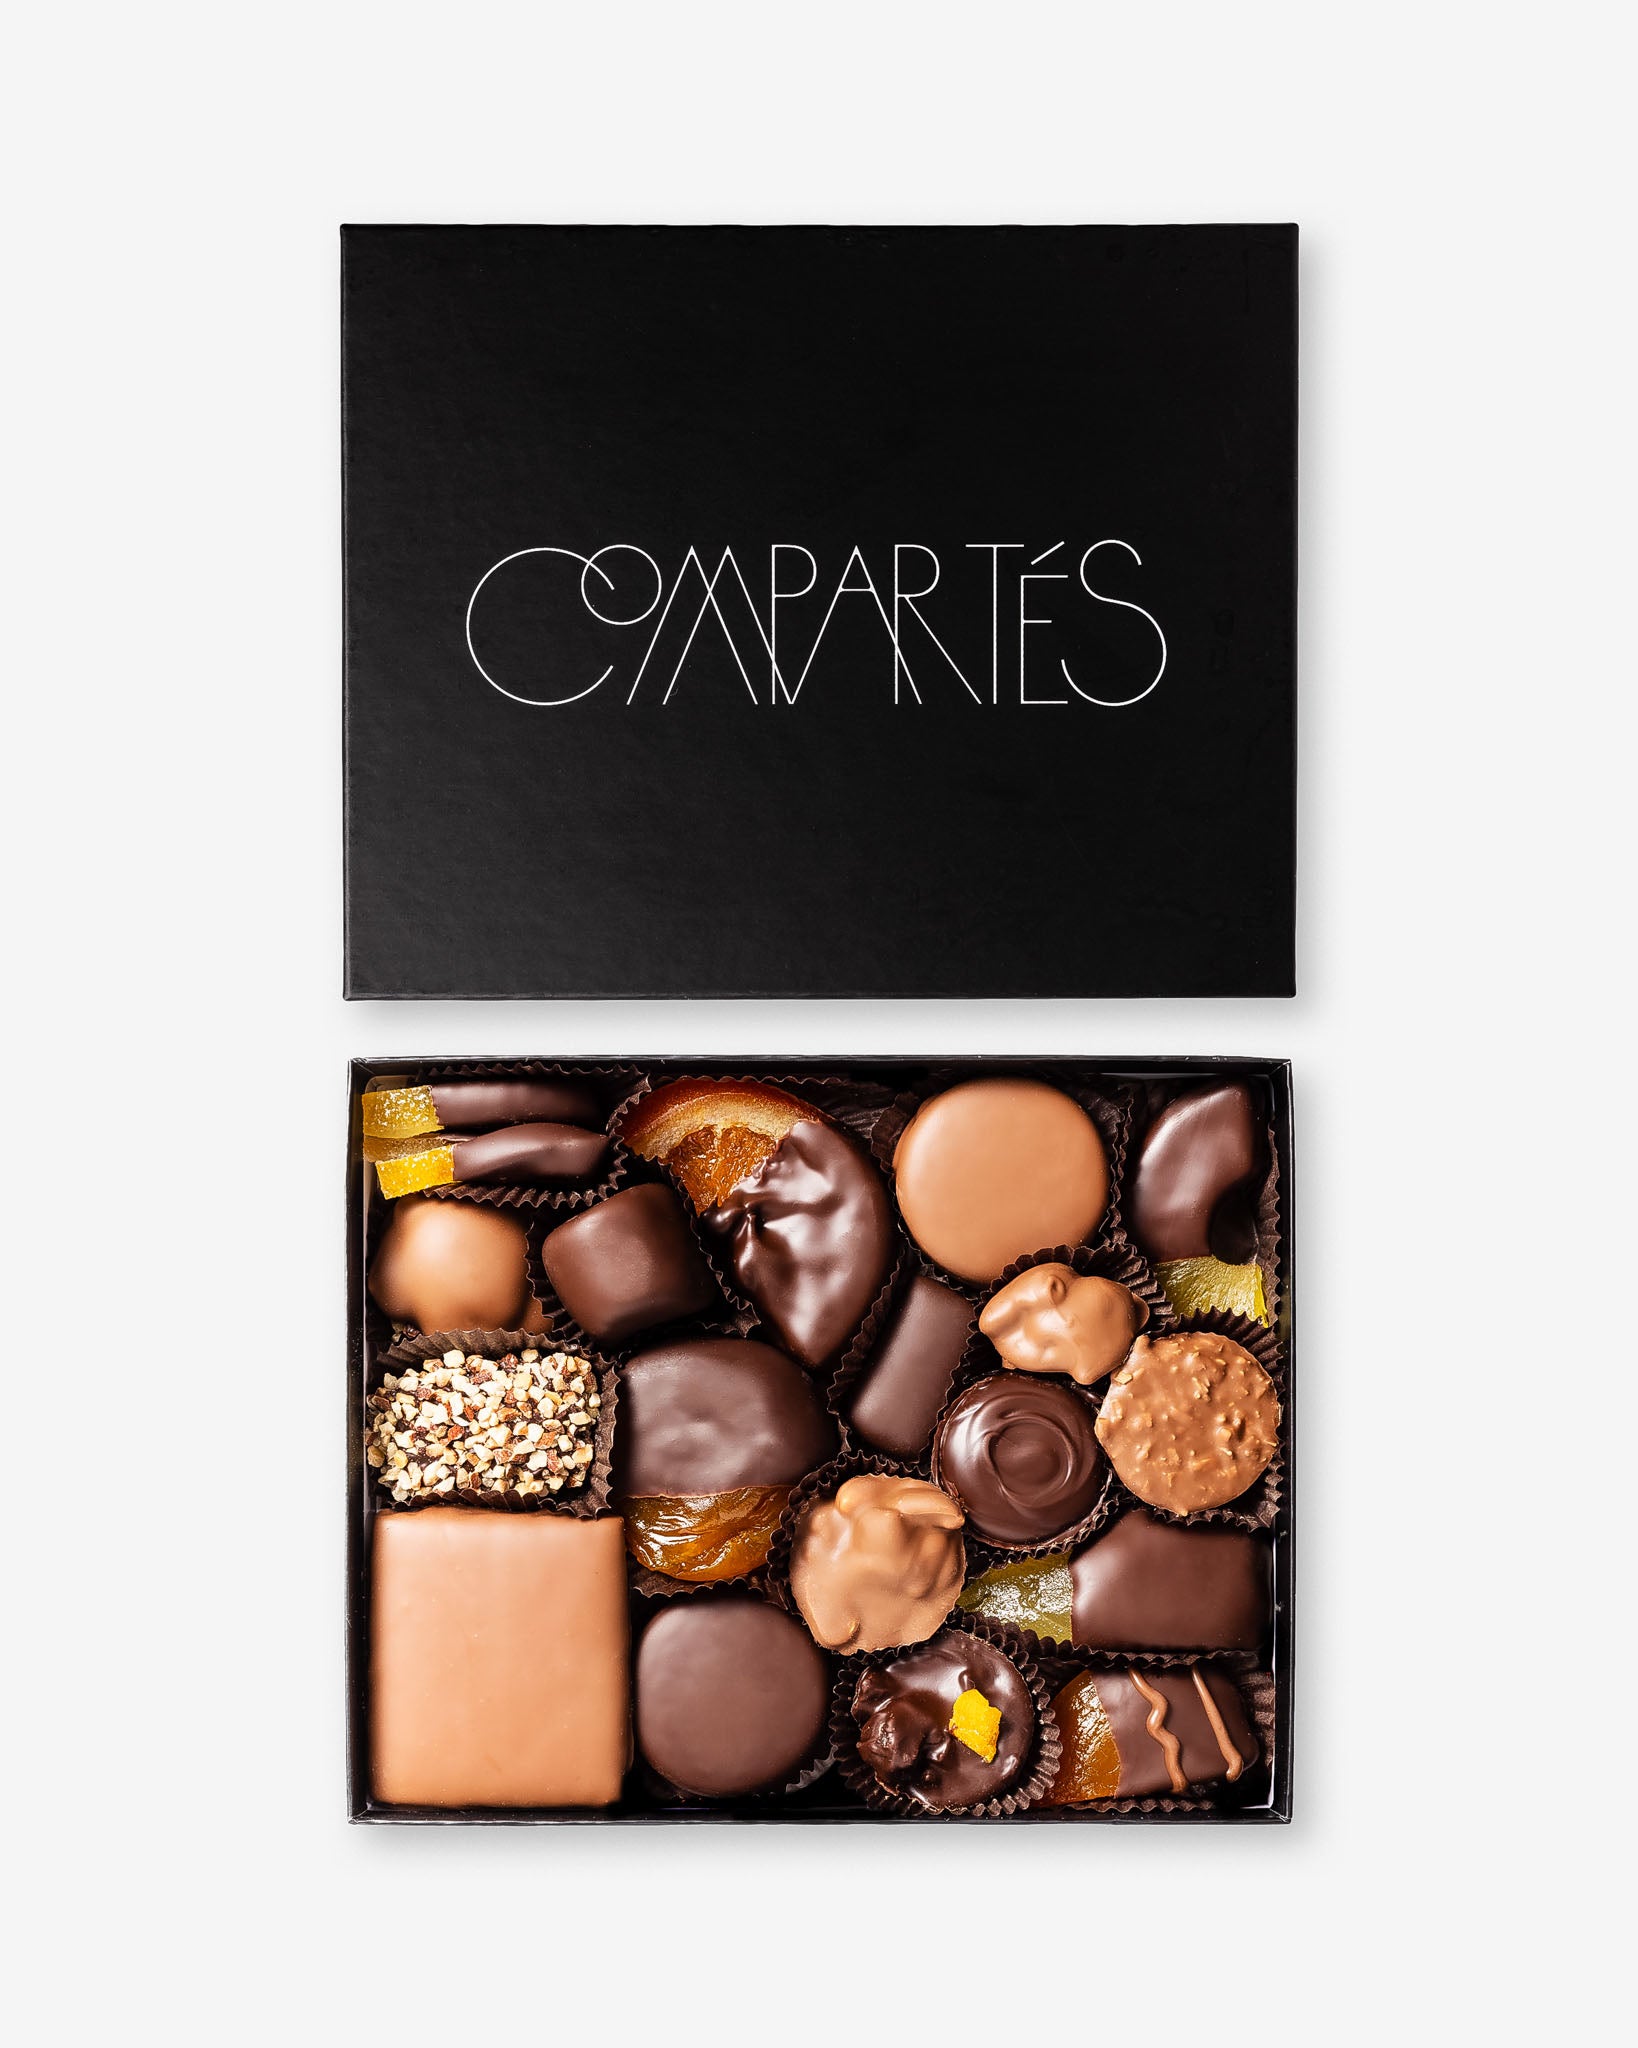 The 10 Most Expensive Chocolates in the World  Expensive chocolate,  Chocolate, Chocolate brands